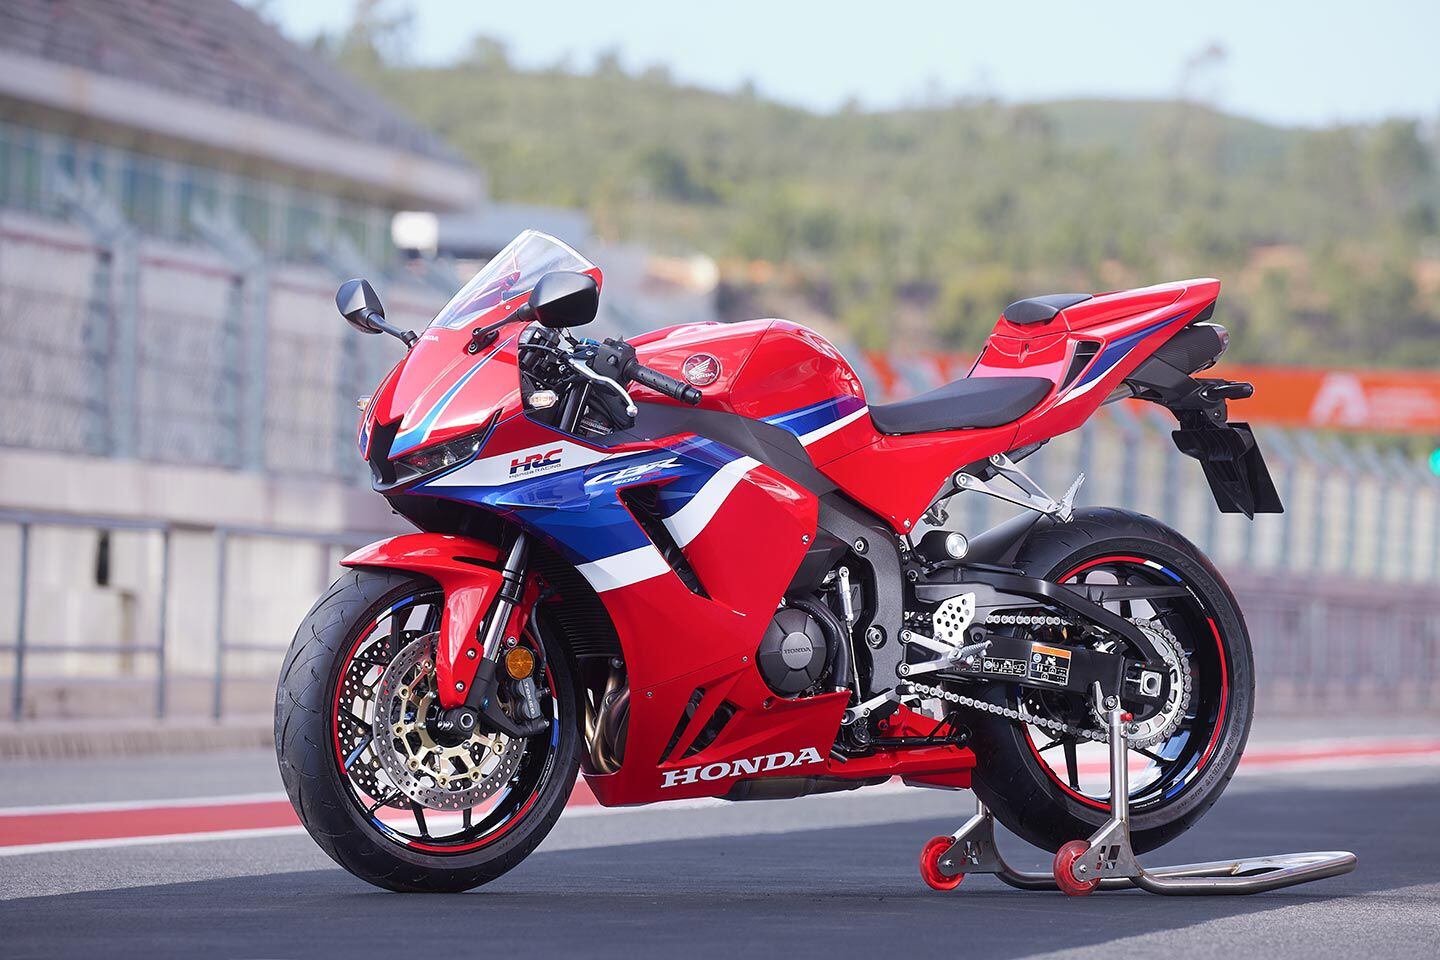 Quoting Honda Motor Europe, “The RR is the ideal bike to fill the gap in the CBR lineup between the CBR650R and the CBR1000RR-R Fireblade.”